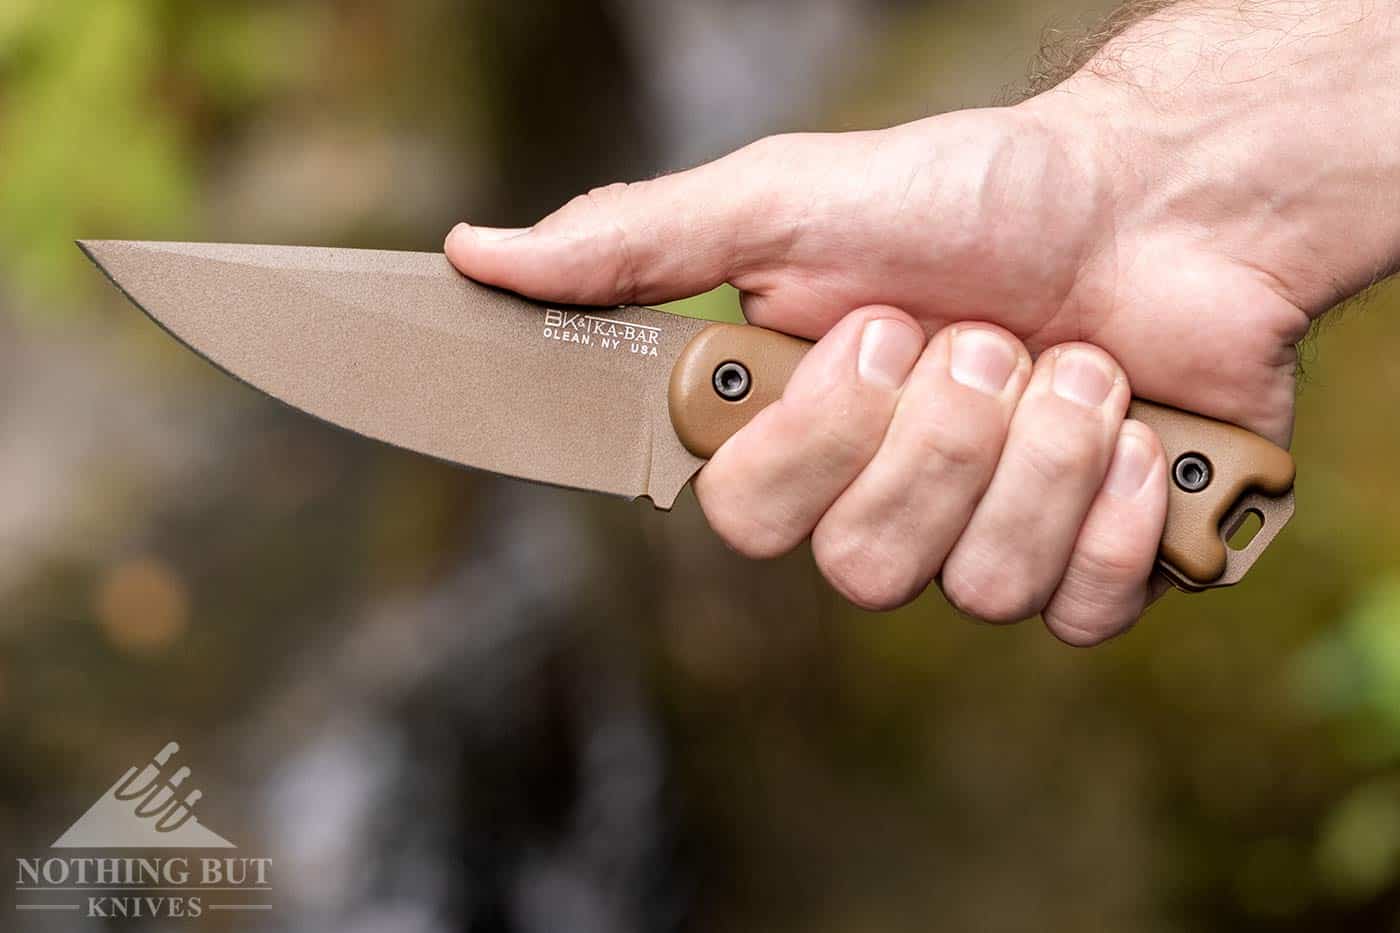 A man's right hand gripping a Ka-Bar survival knife while stablizing it with his thumb pressed firmly against the knife's spine.